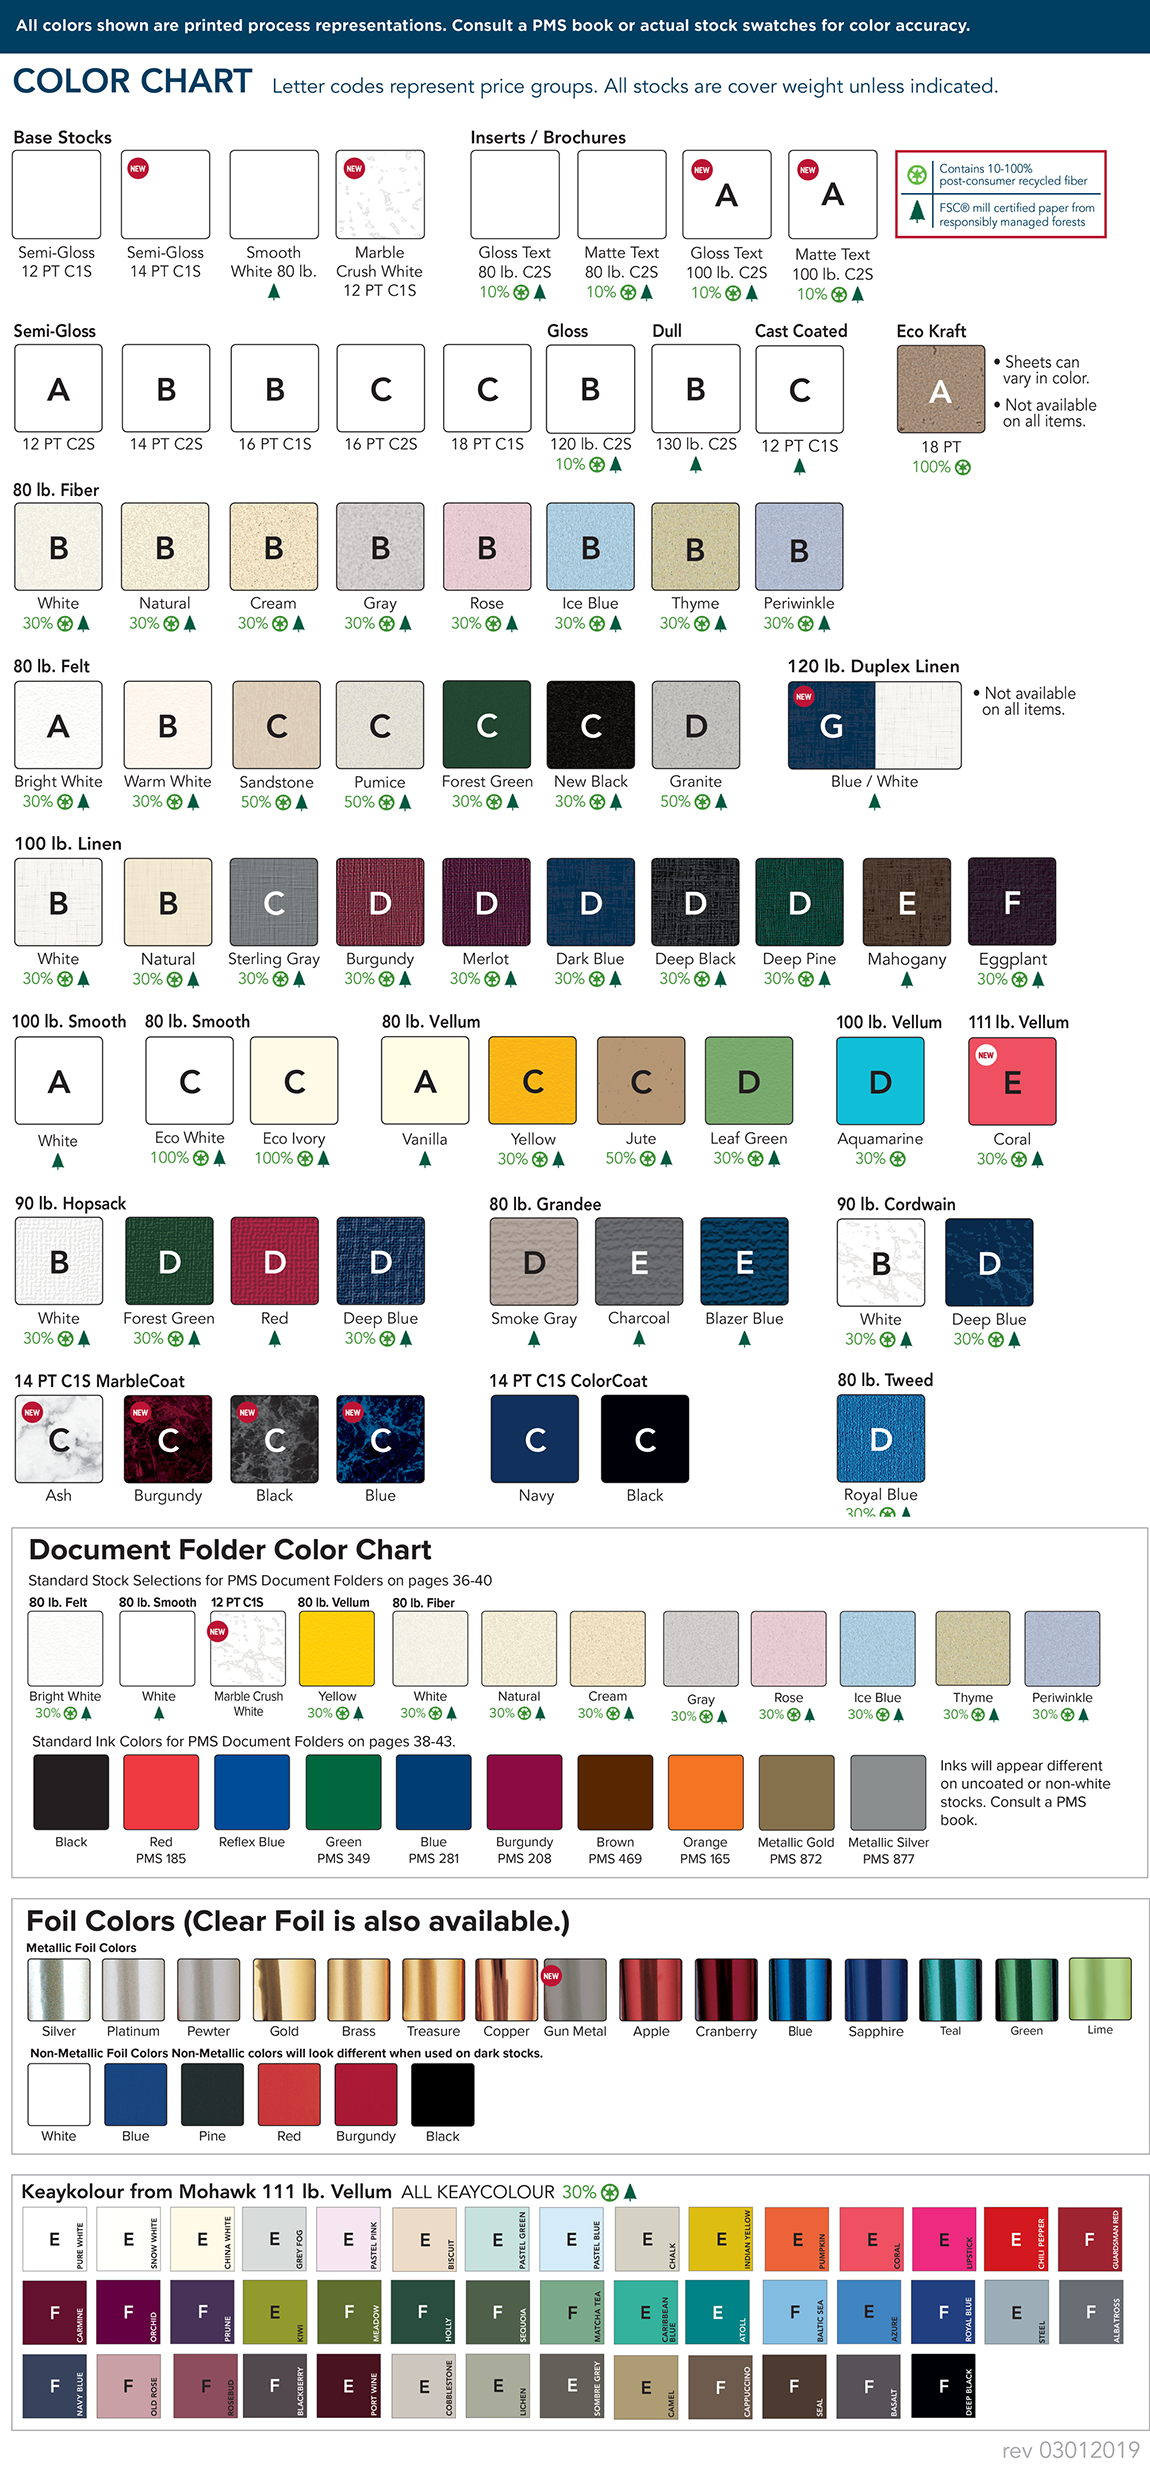 Stock, Ink and Foil Color Chart